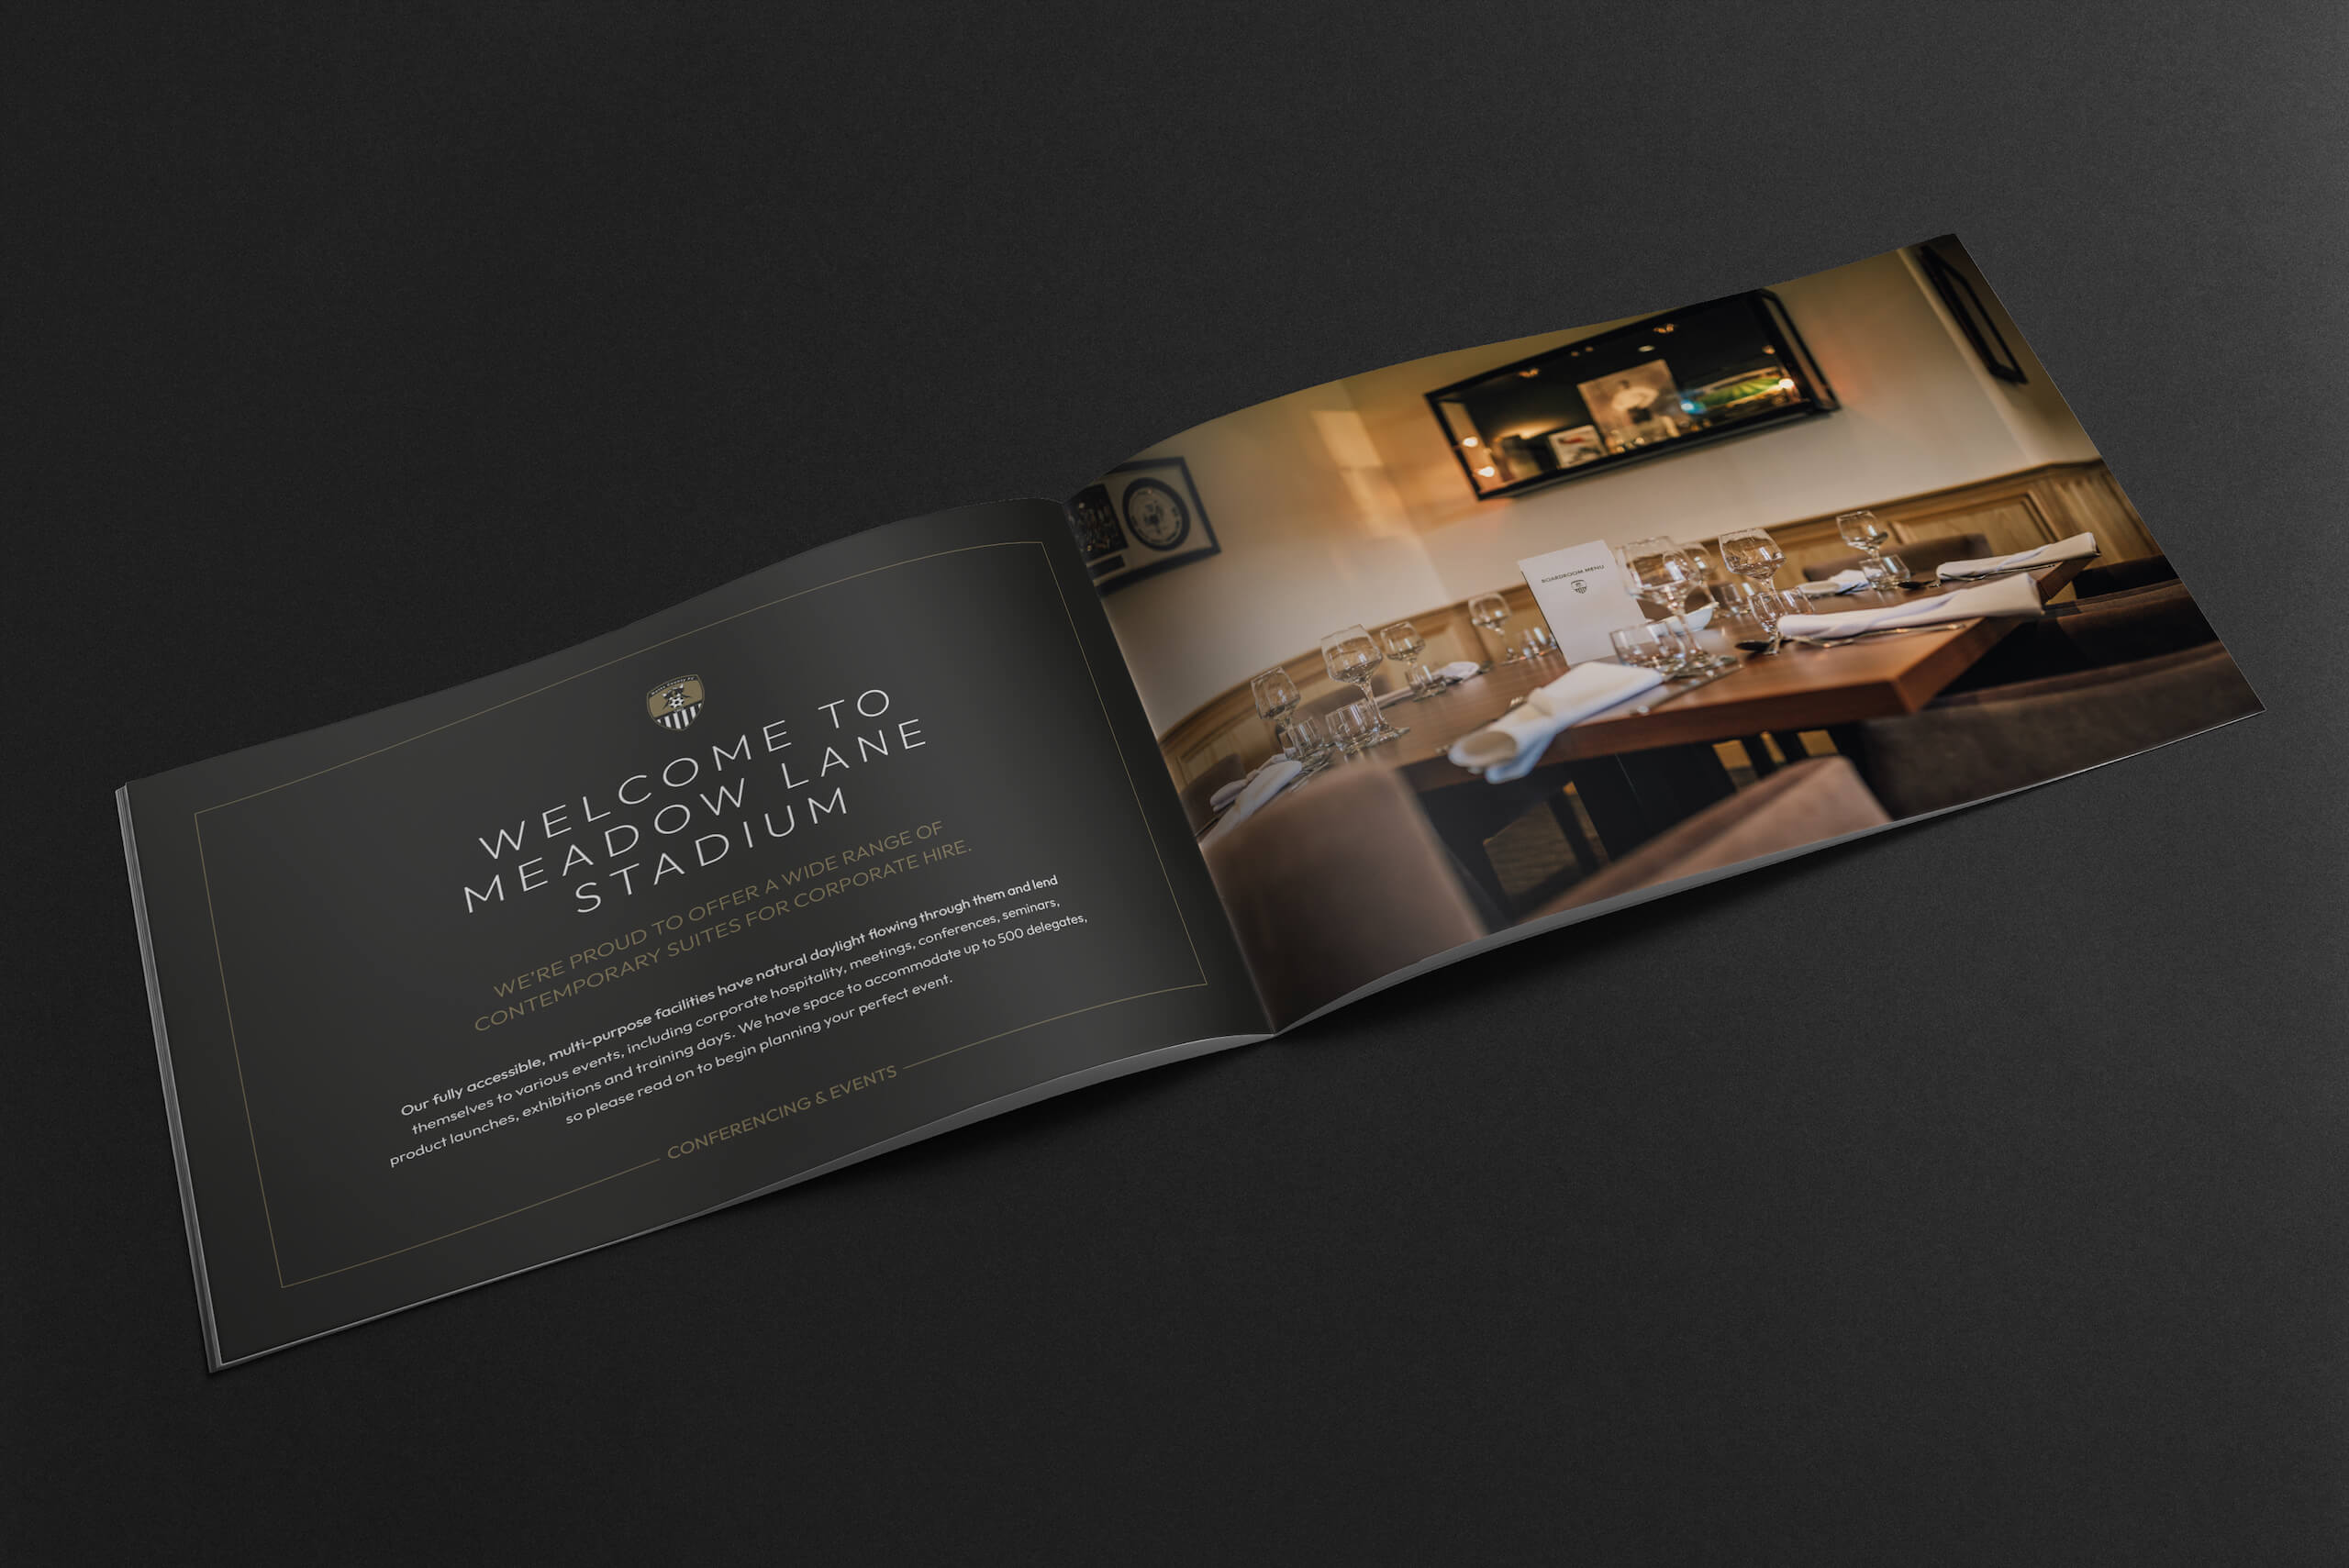 A black and white brochure showcasing the Conferencing & Events services offered by Notts County FC.